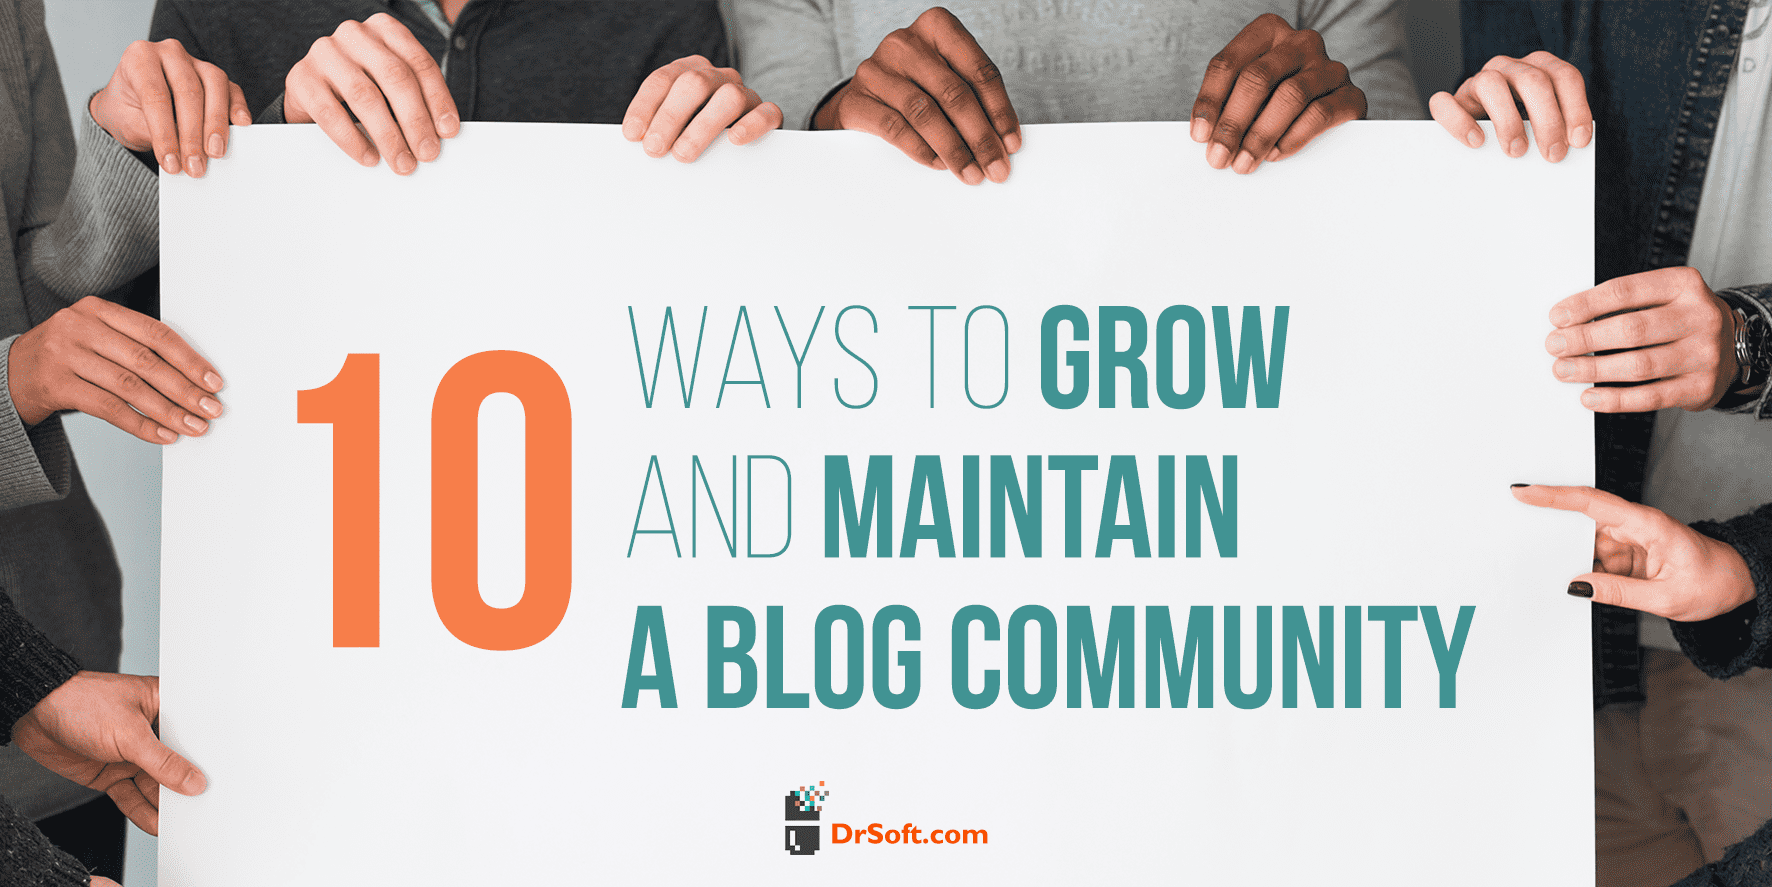 10 Ways to Grow and Maintain a Blog Community